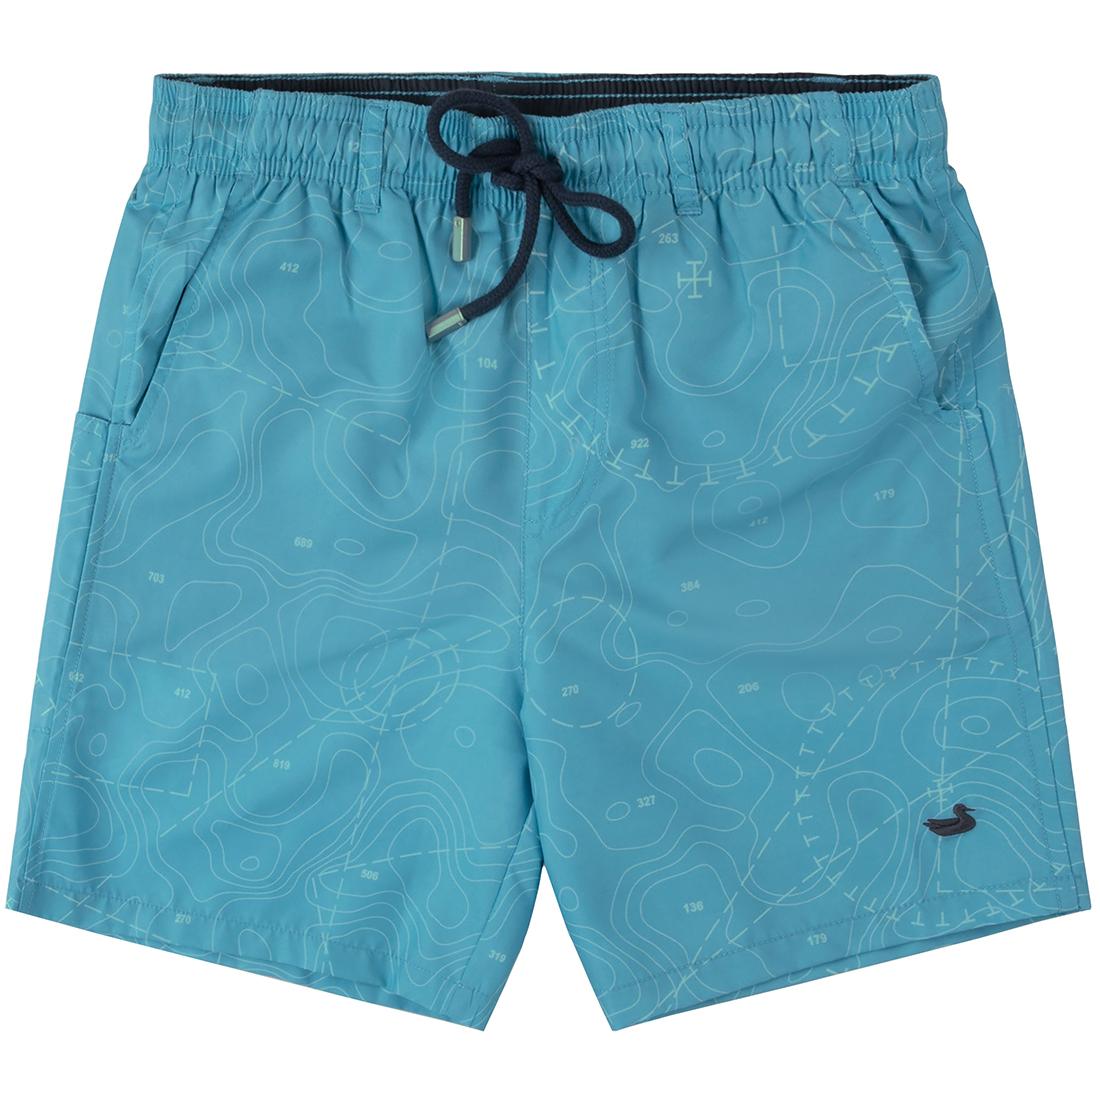  Youth Dockside Swim Trunk Off The Charts